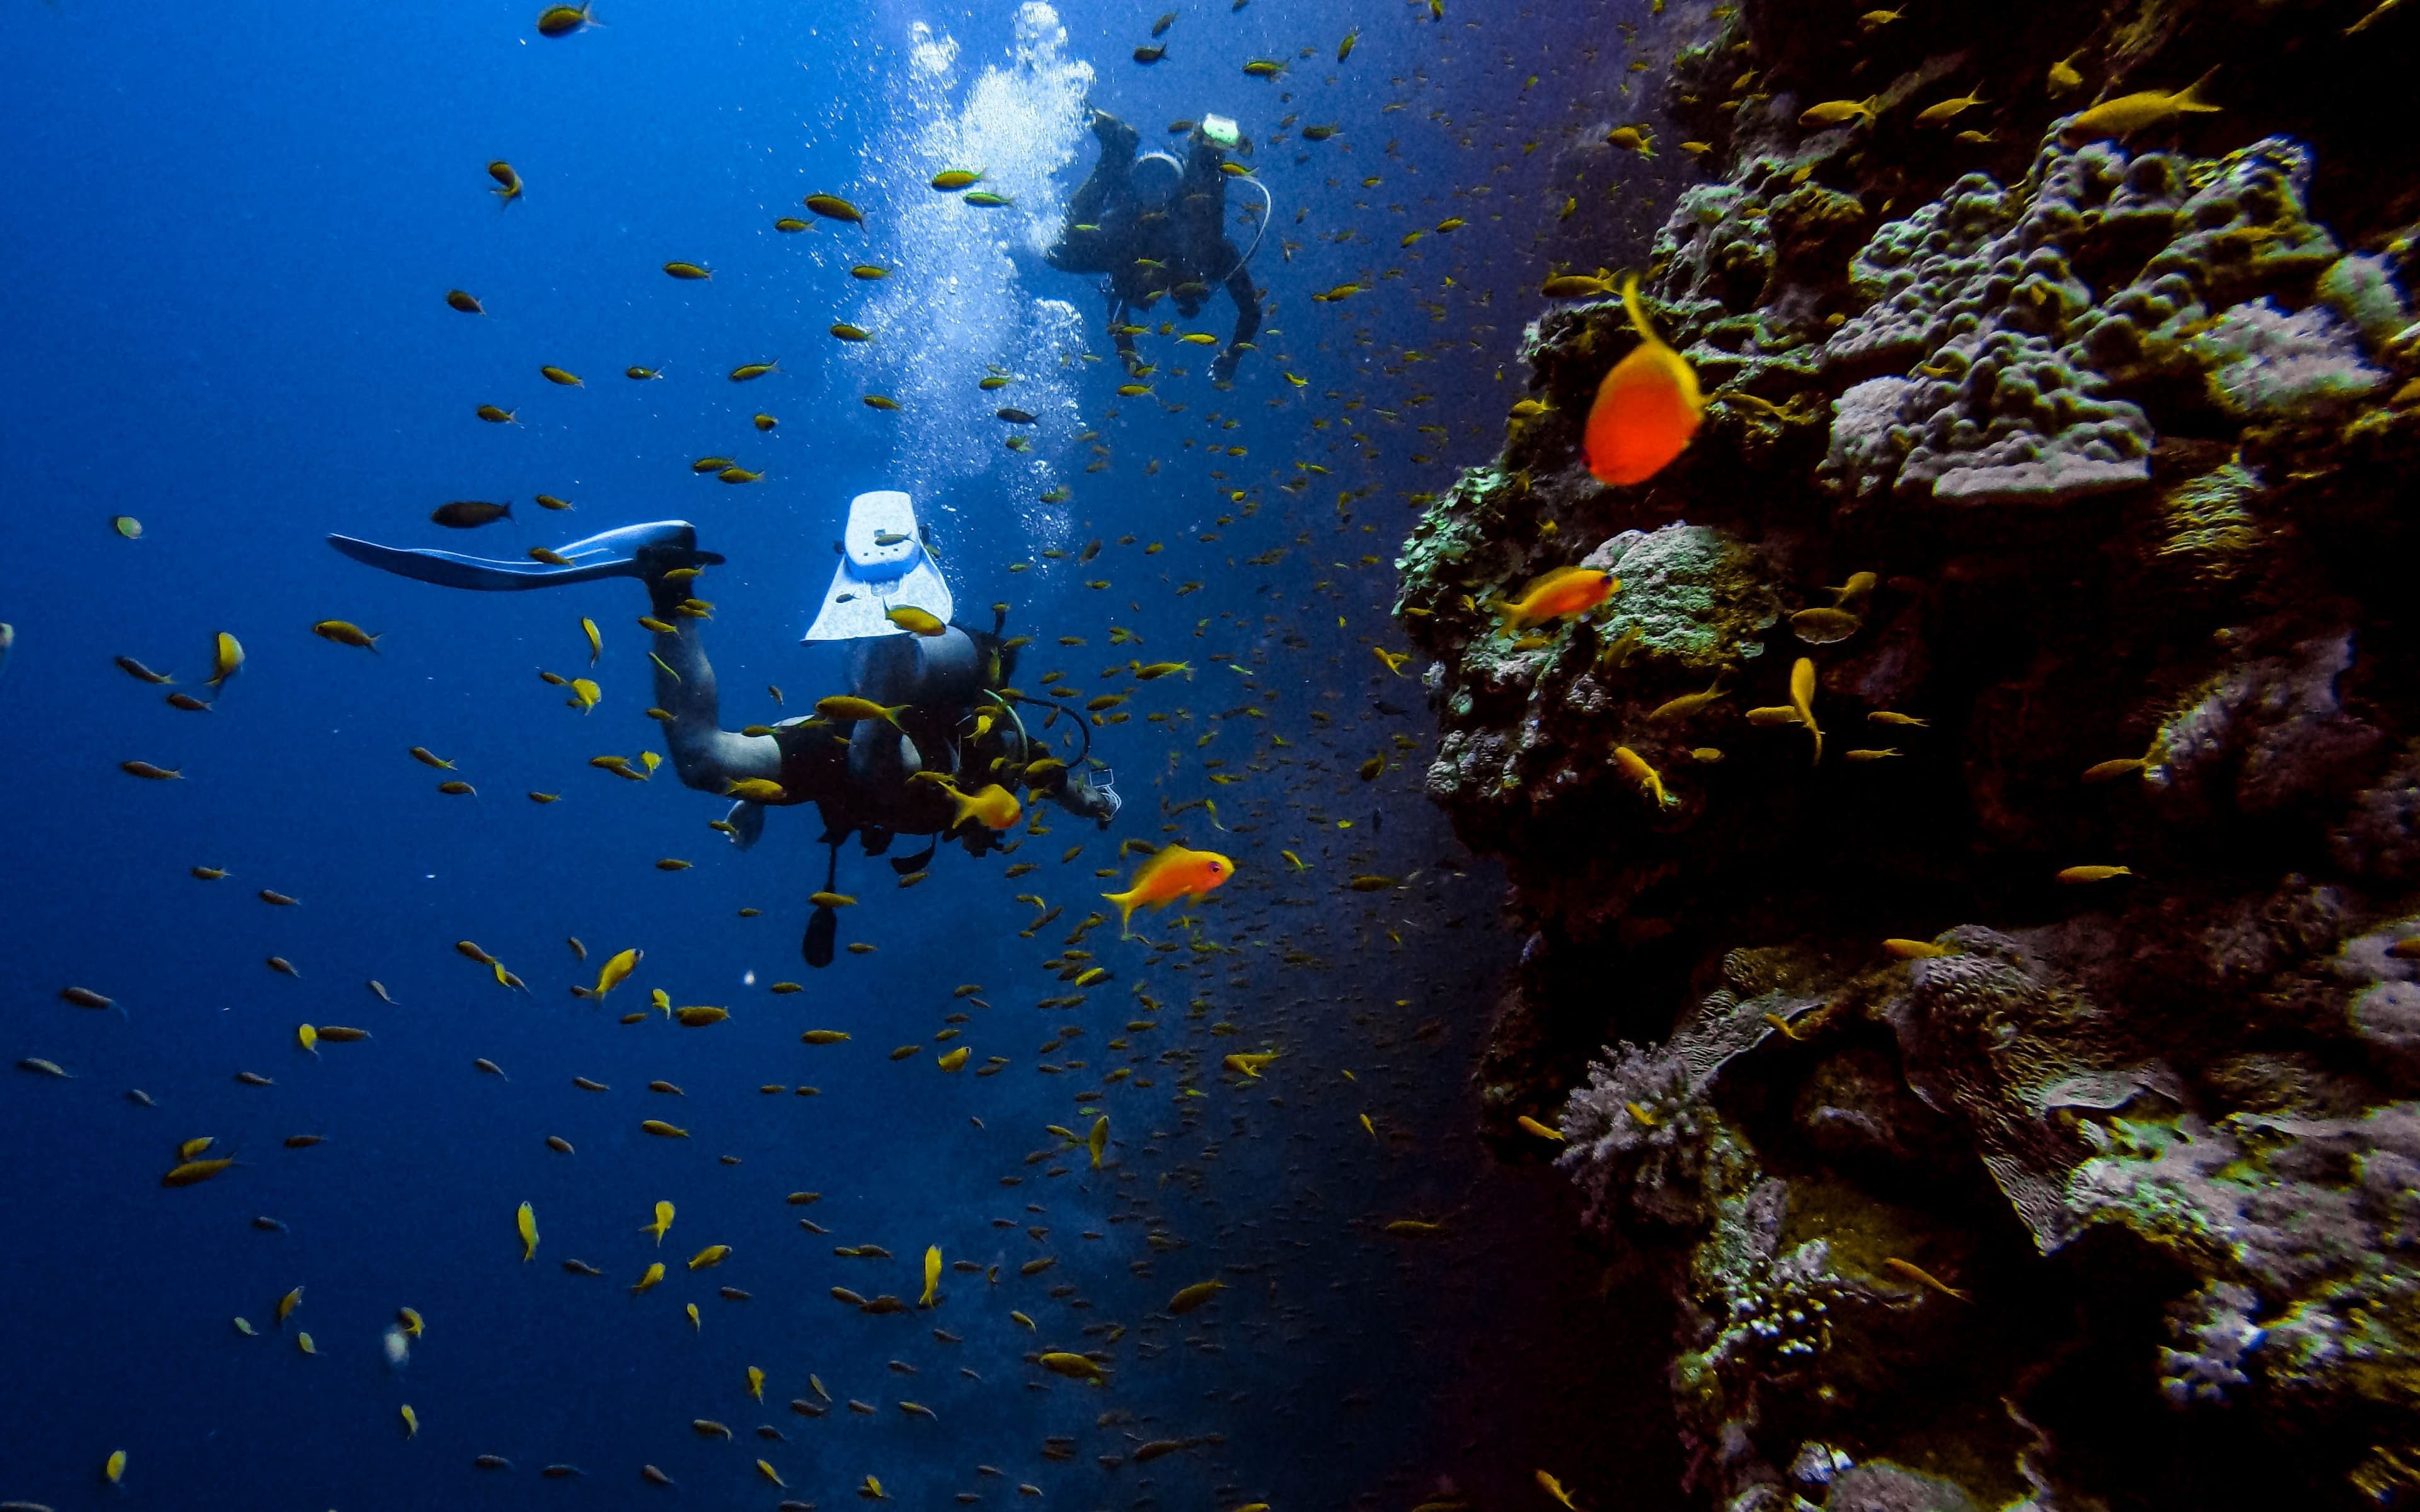 Scuba Divers explore  many colourful fish around the rock reef